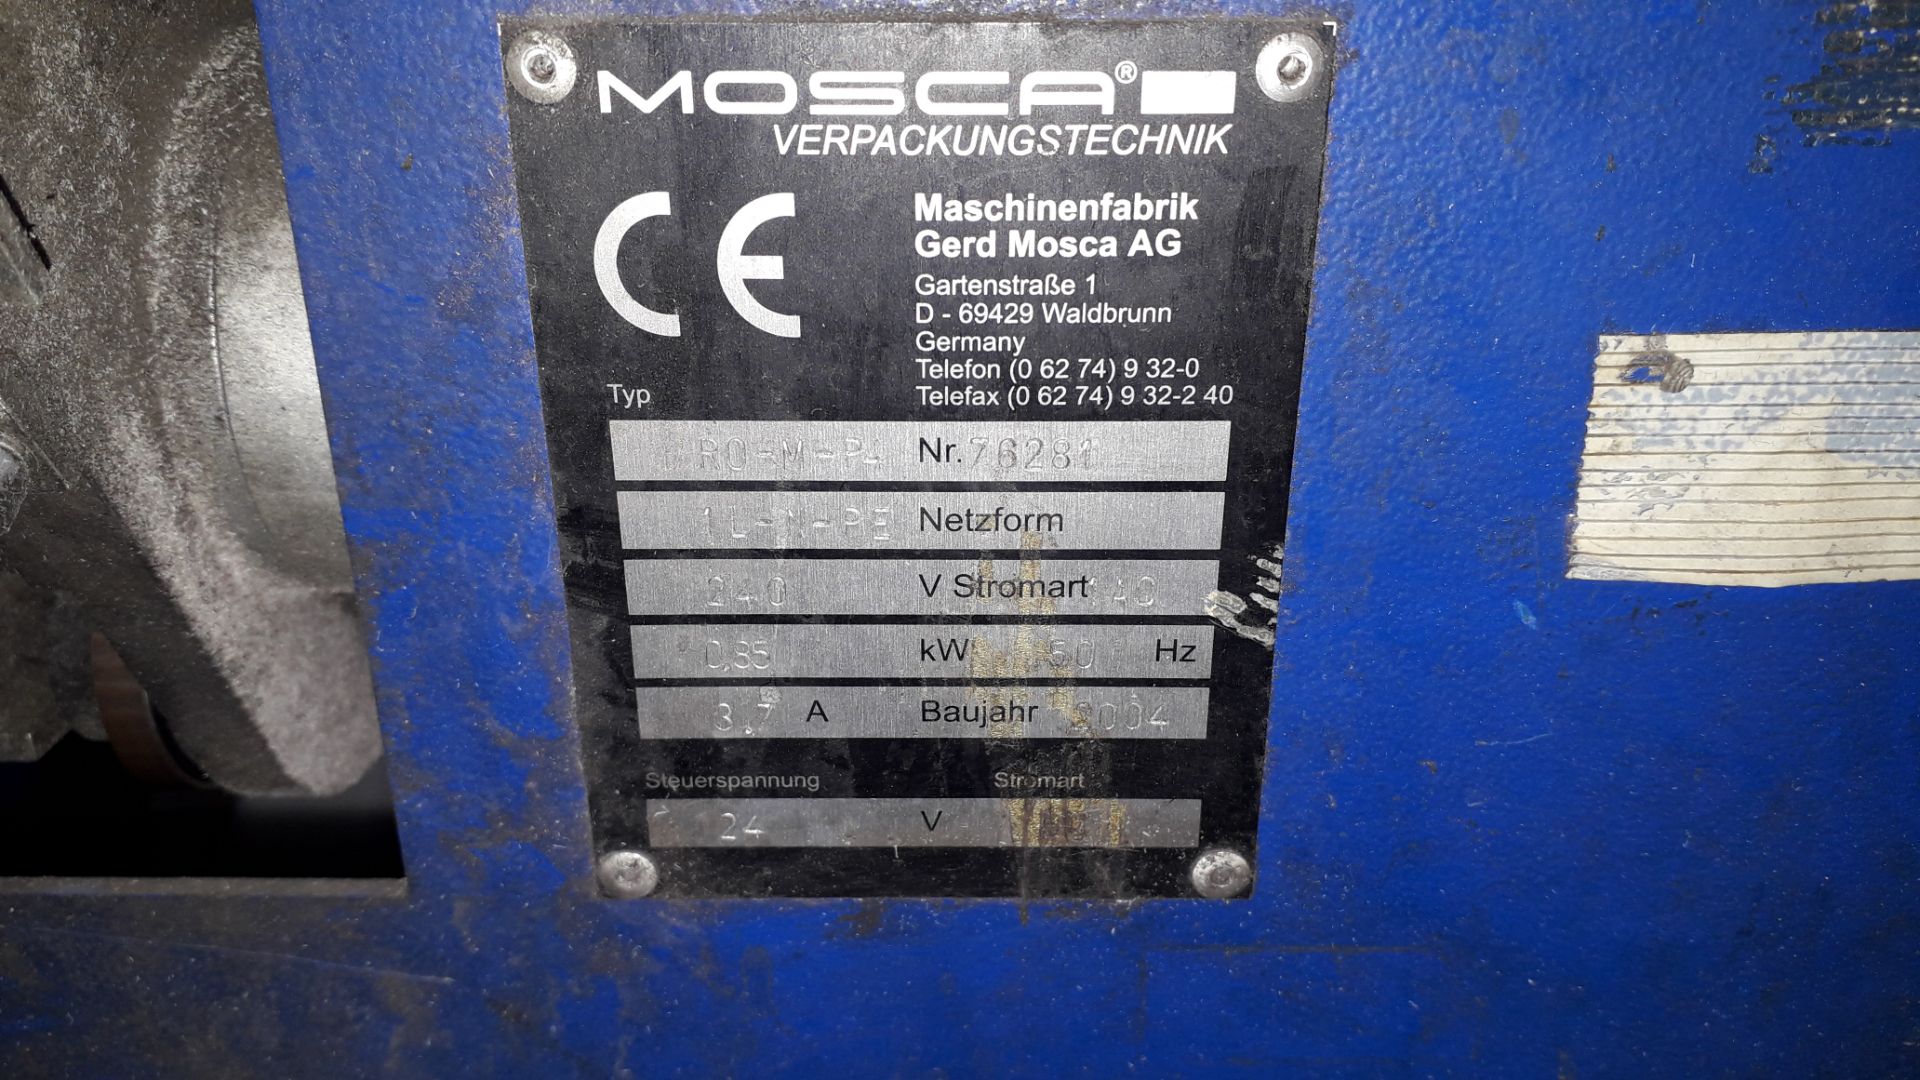 Mosca ROM P4 Strapping Machine, Serial Number 76281 (2004) - Image 3 of 3